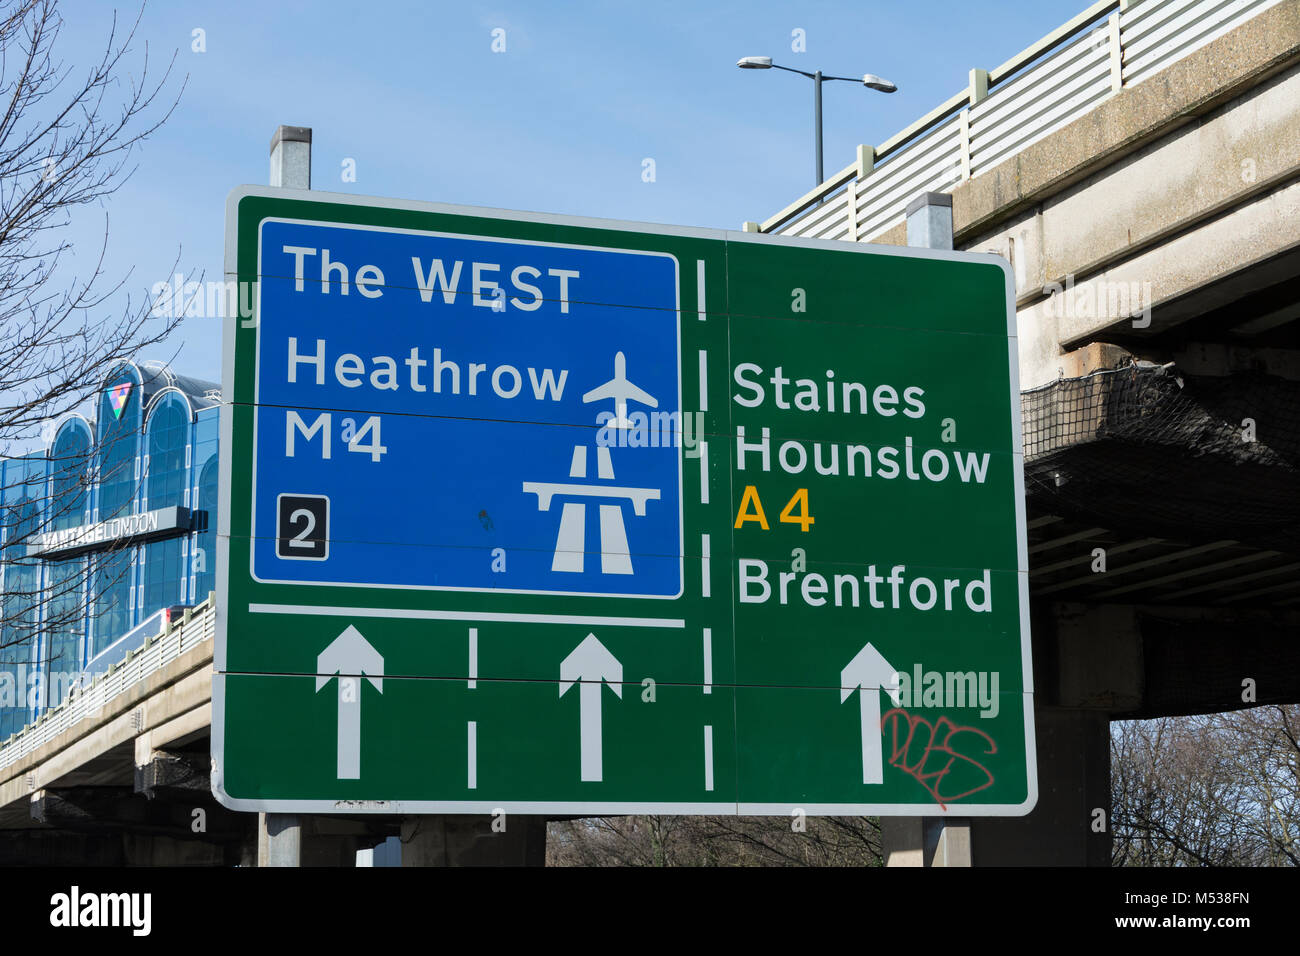 The A4/M4 Chiswick Flyover in west London, UK Stock Photo